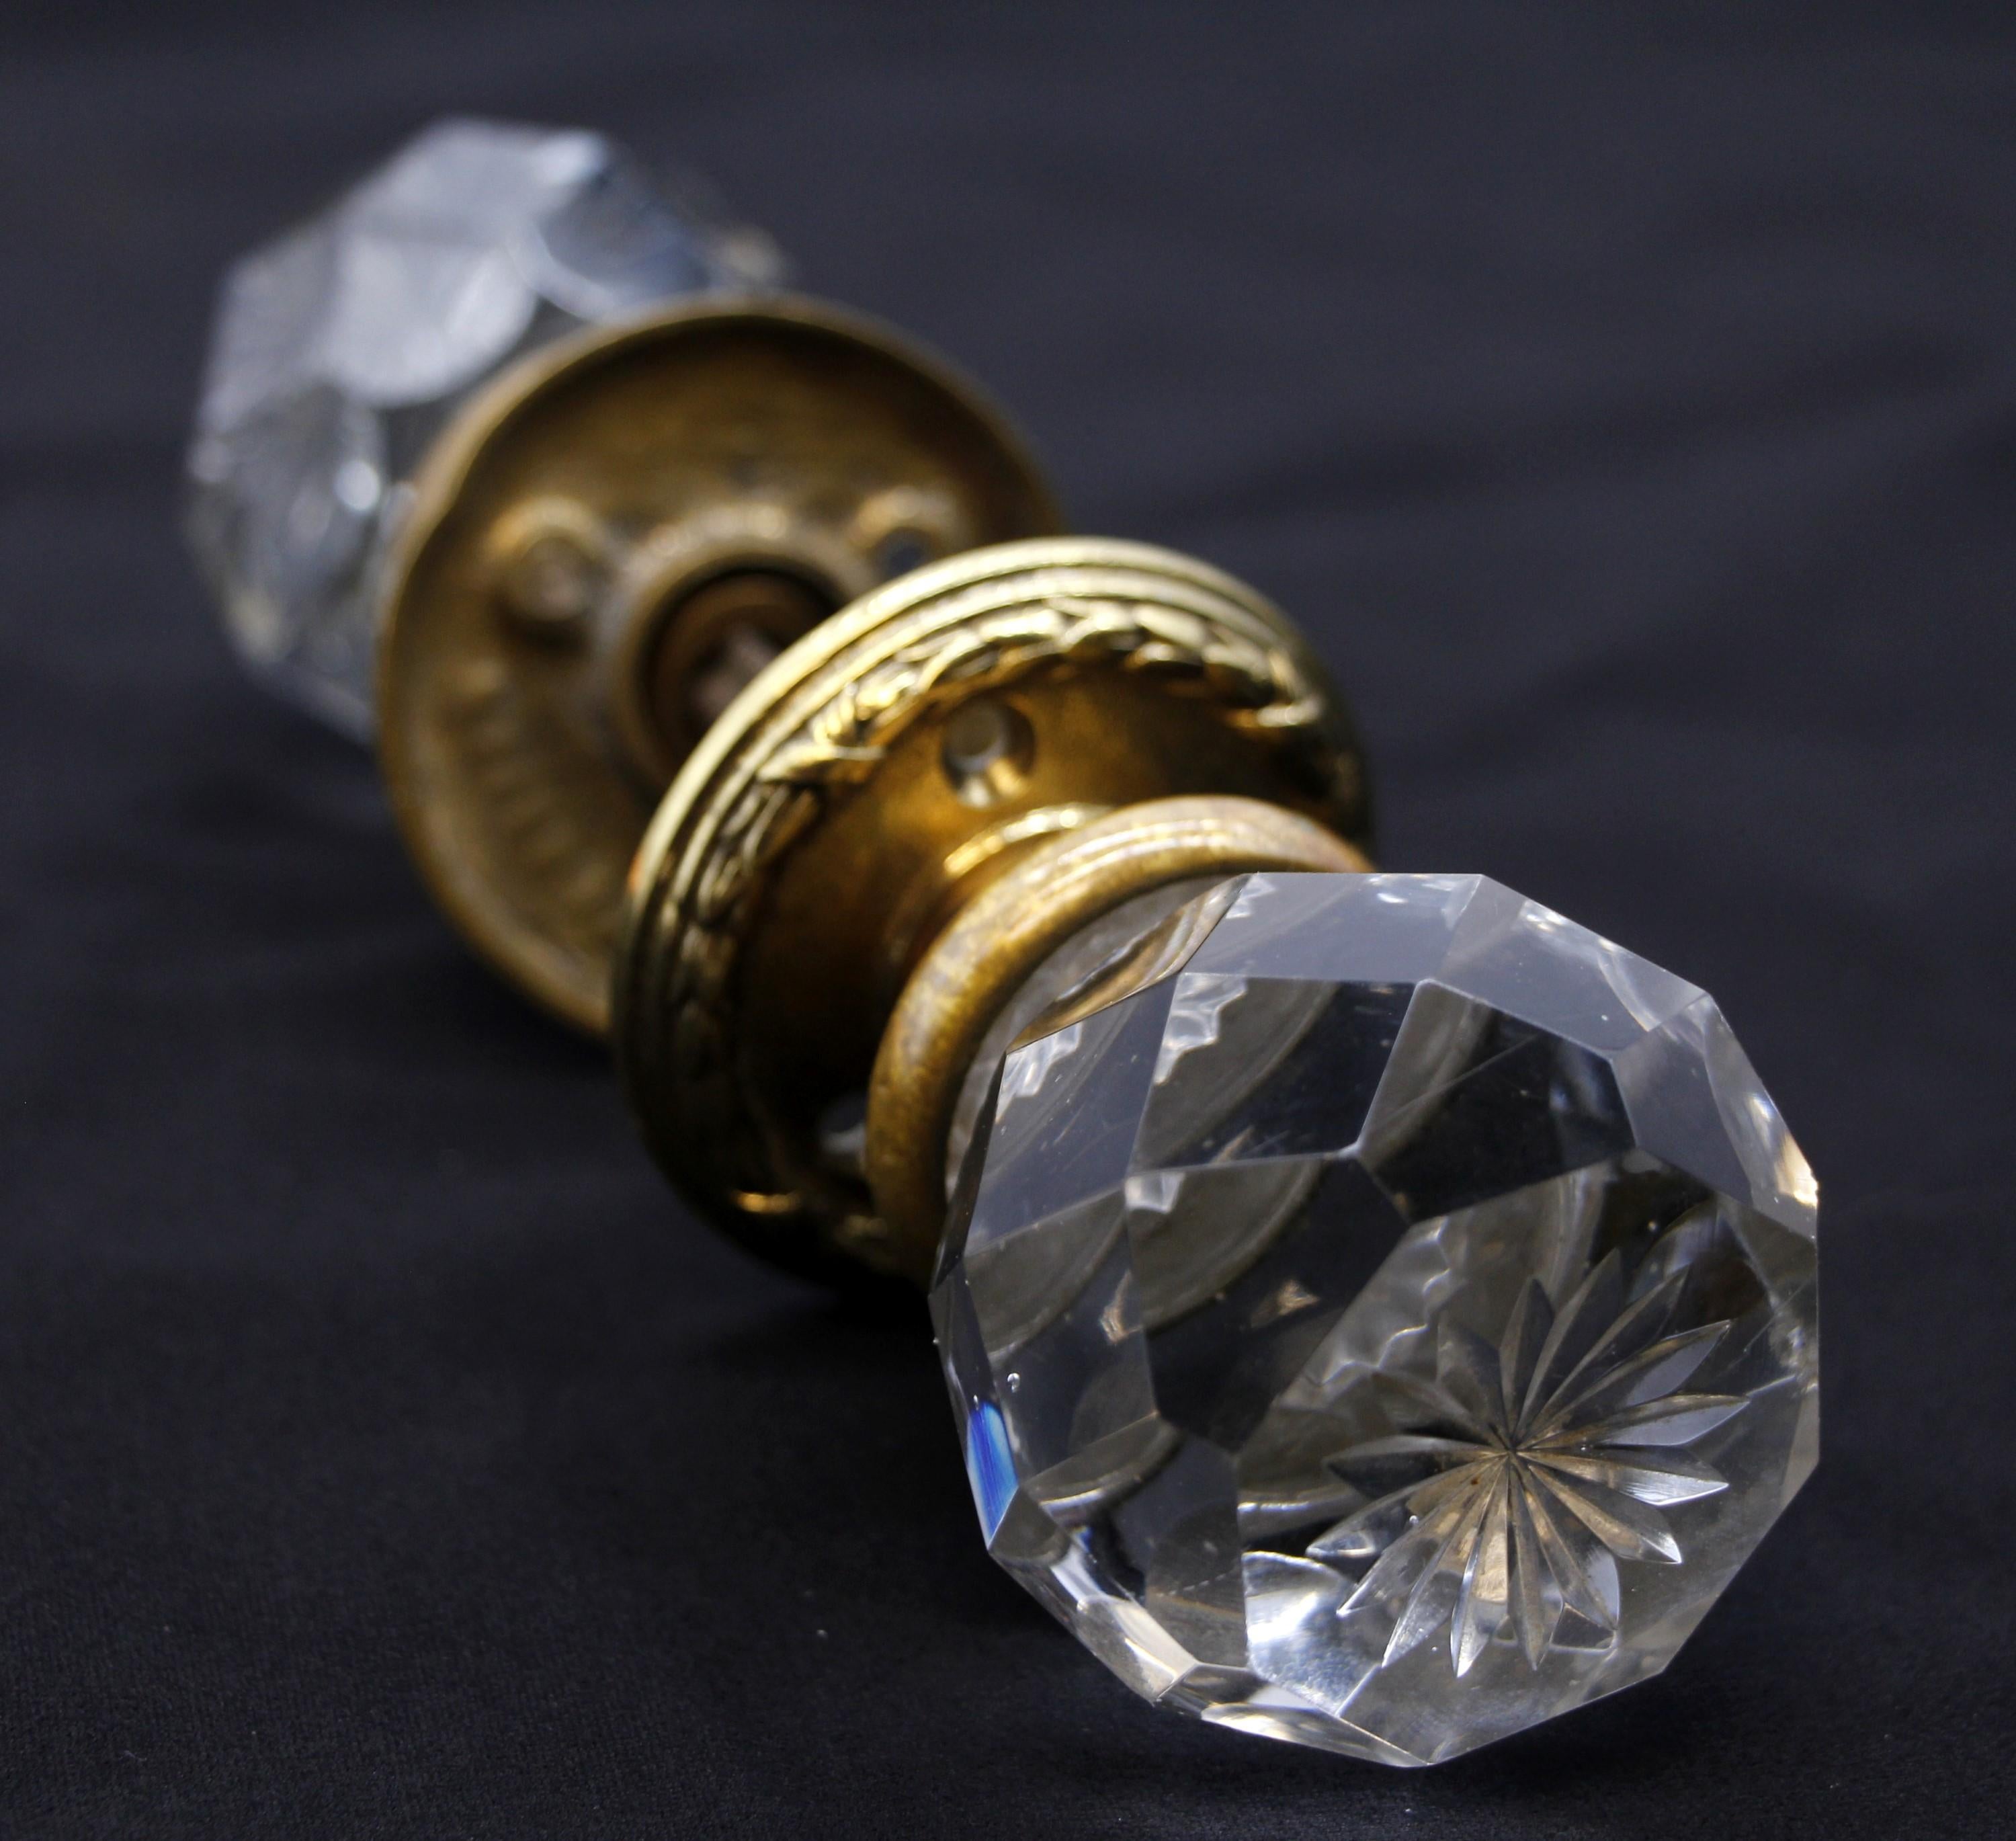 Rare early 20th century clear glass antique faceted door knob set with a center etched floral design. Set included two ornate brass rosettes, two doorknobs and one spindle. Both rosettes are marked Clodian P 29524. Some small scrapes and chips.